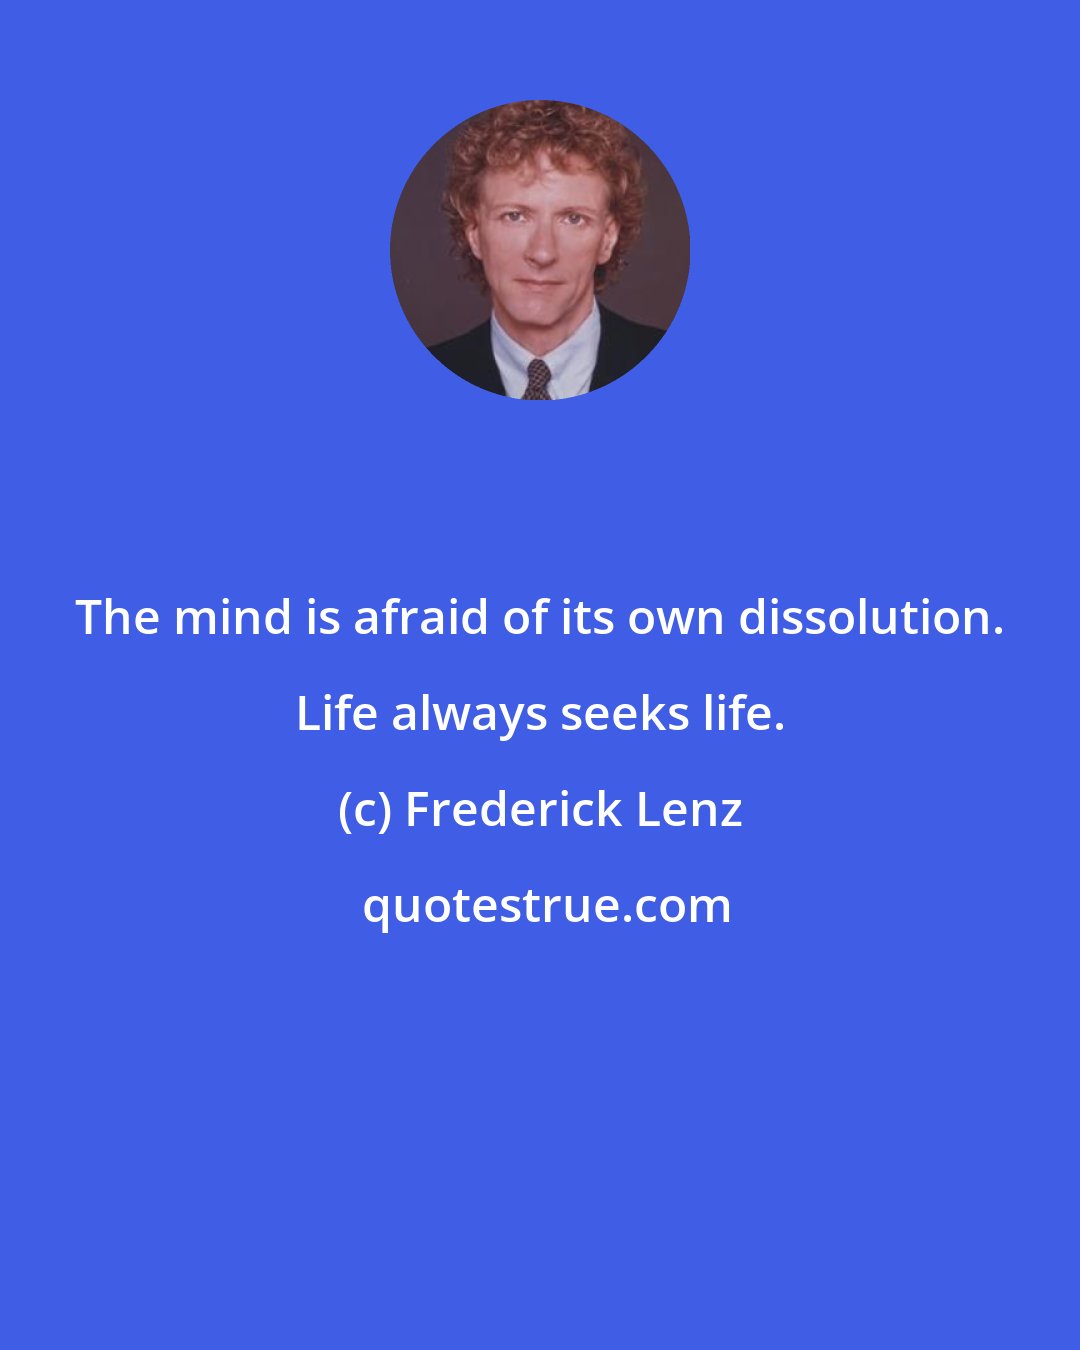 Frederick Lenz: The mind is afraid of its own dissolution. Life always seeks life.